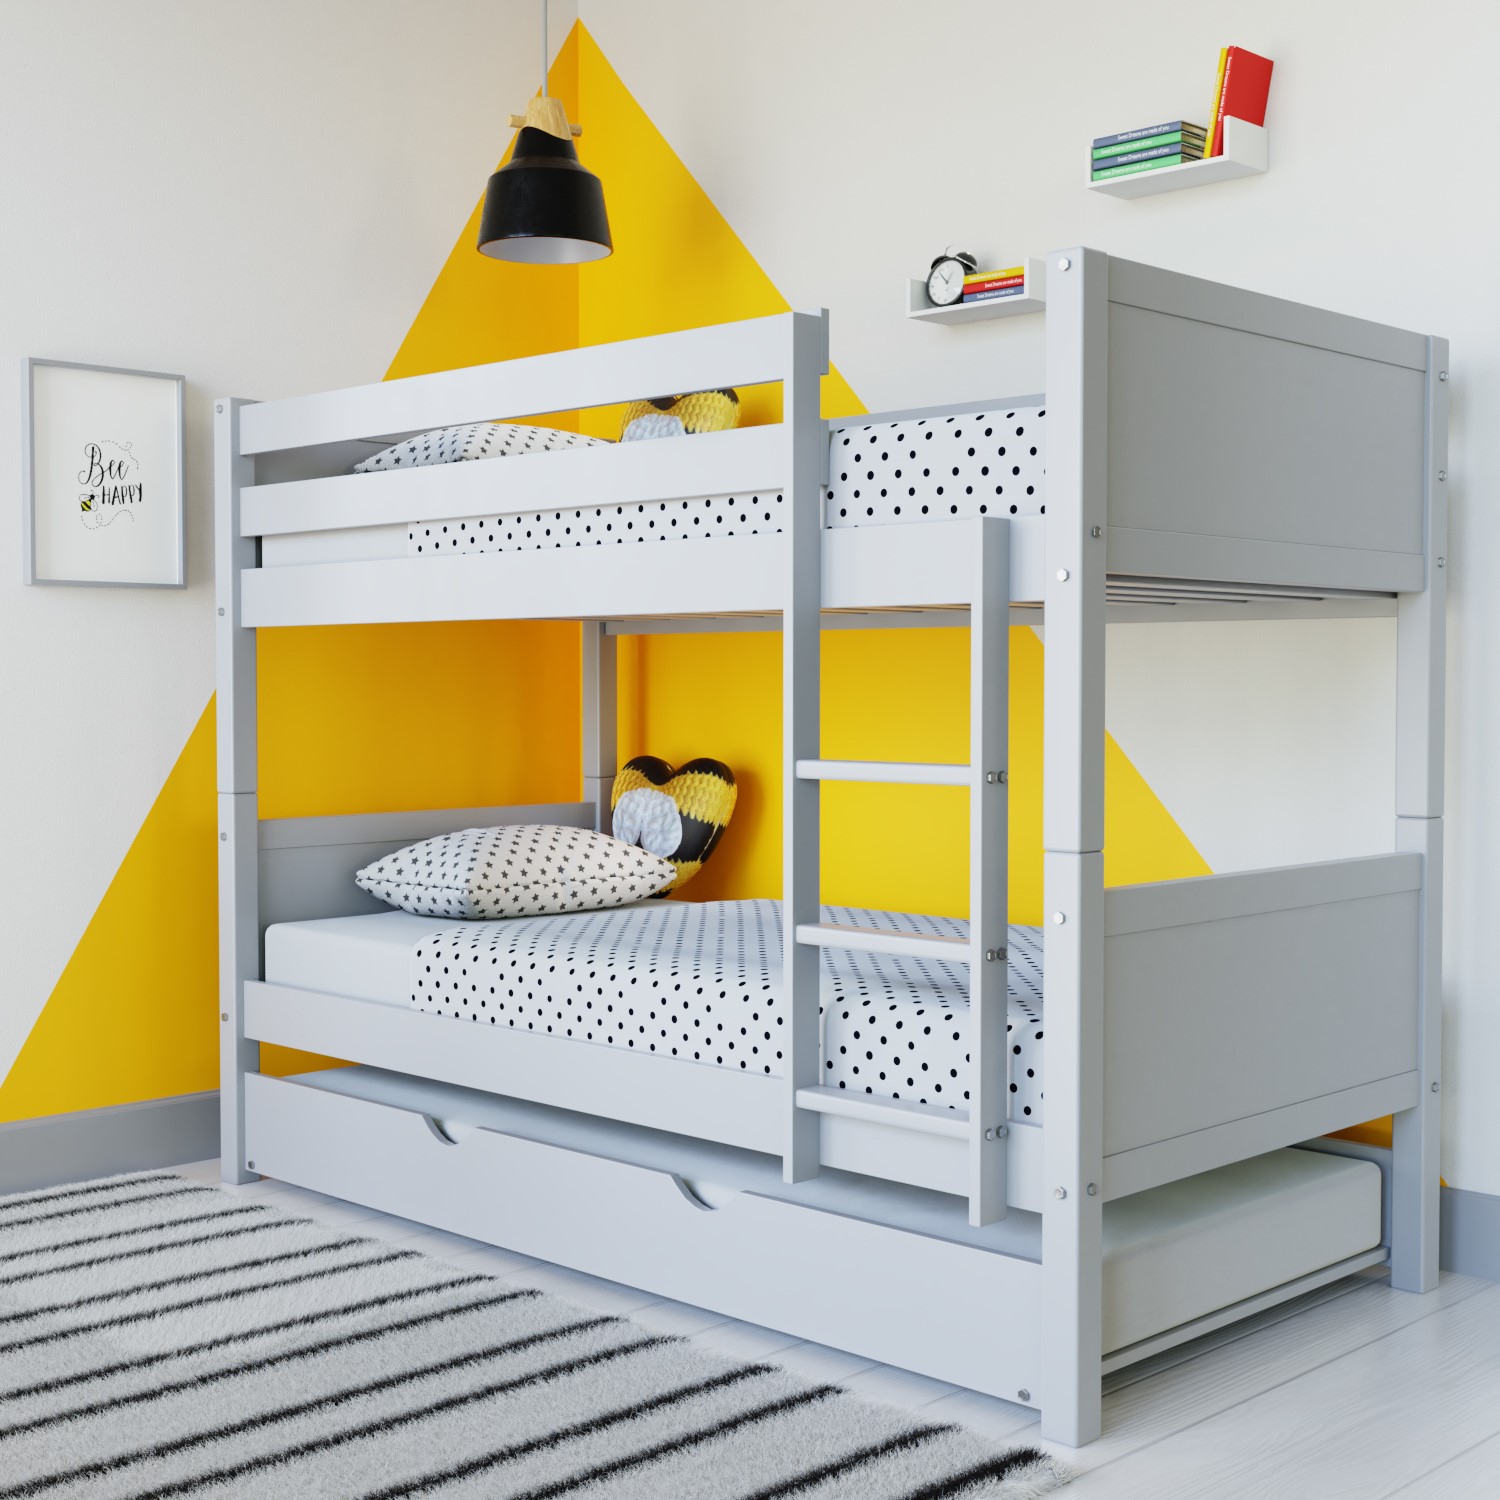 Read more about Grey wooden detachable bunk bed with trundle luca